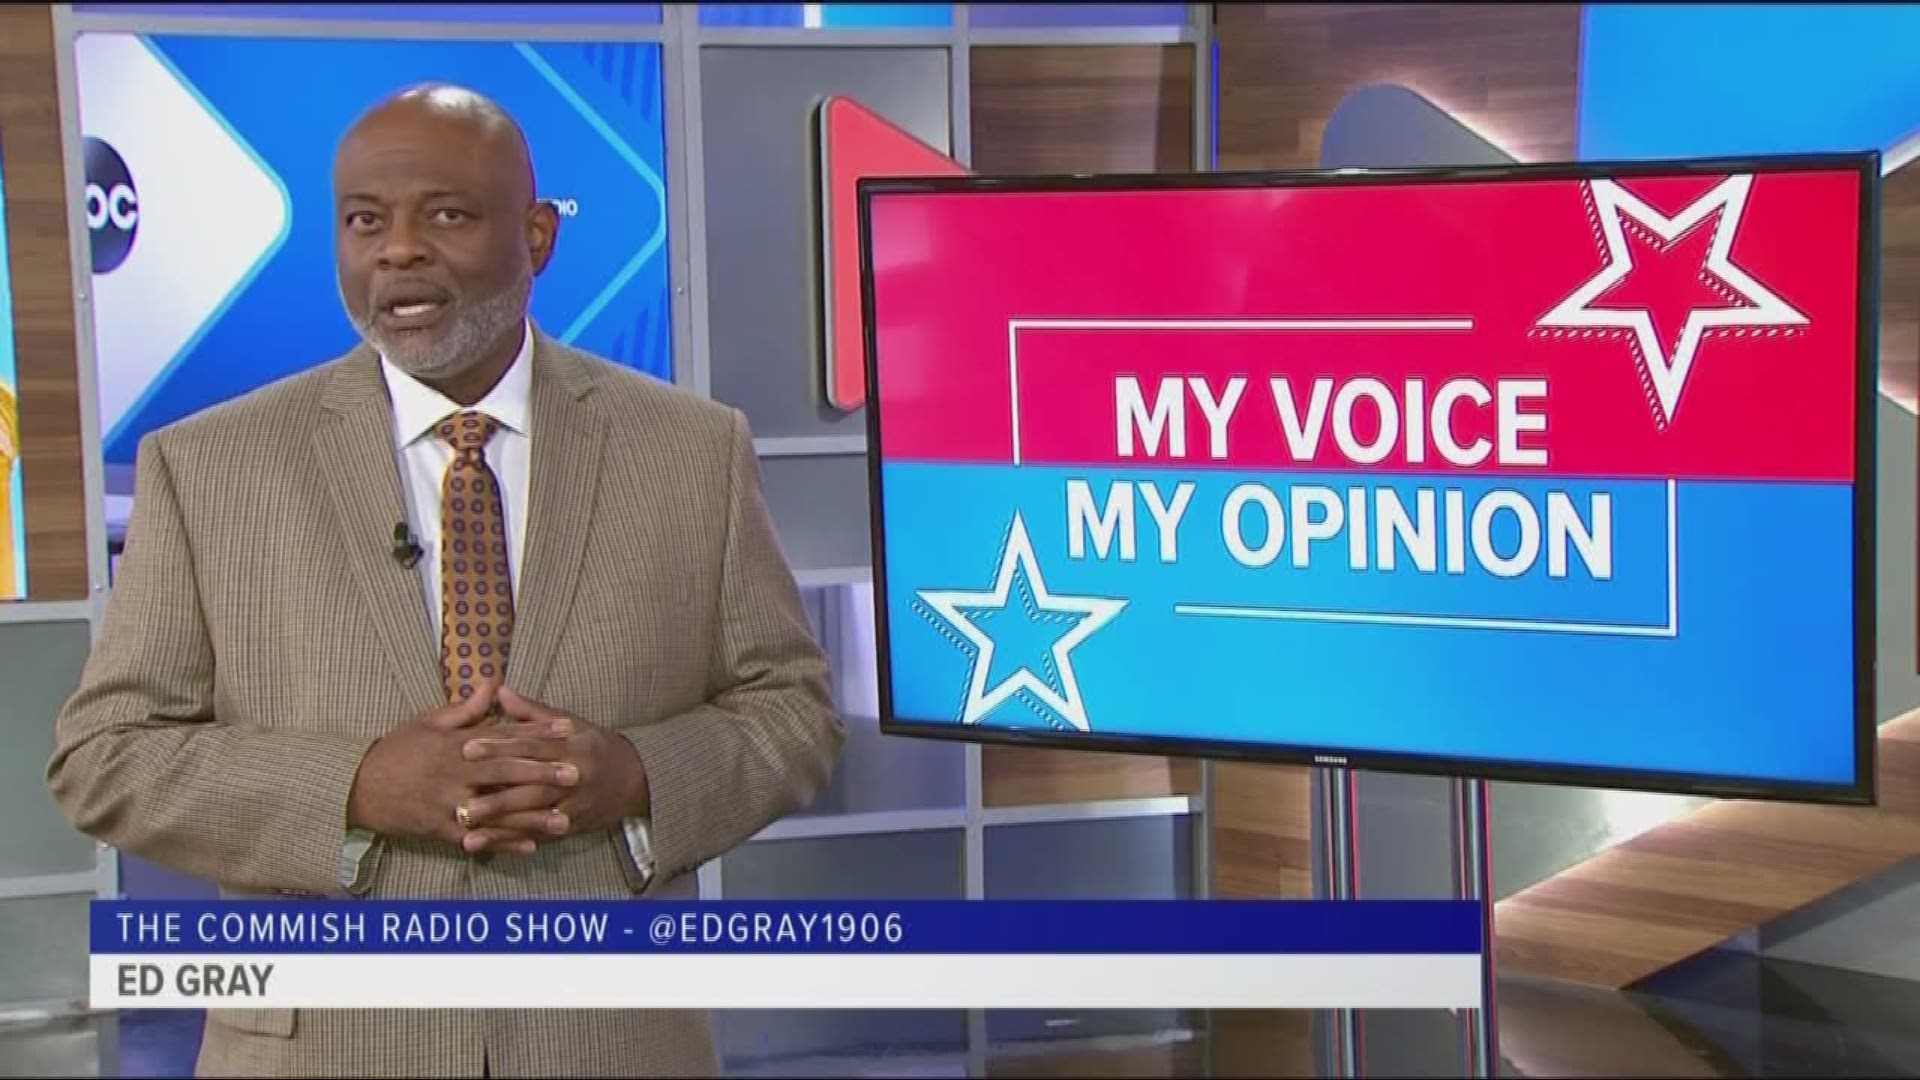 There are a lot of ways to describe American politics today. However, civil probably isn't one most people would use. Ed Gray, from the Commish Radio Show, gives his take on the level of political discourse in this week's My Voice, My Opinion.